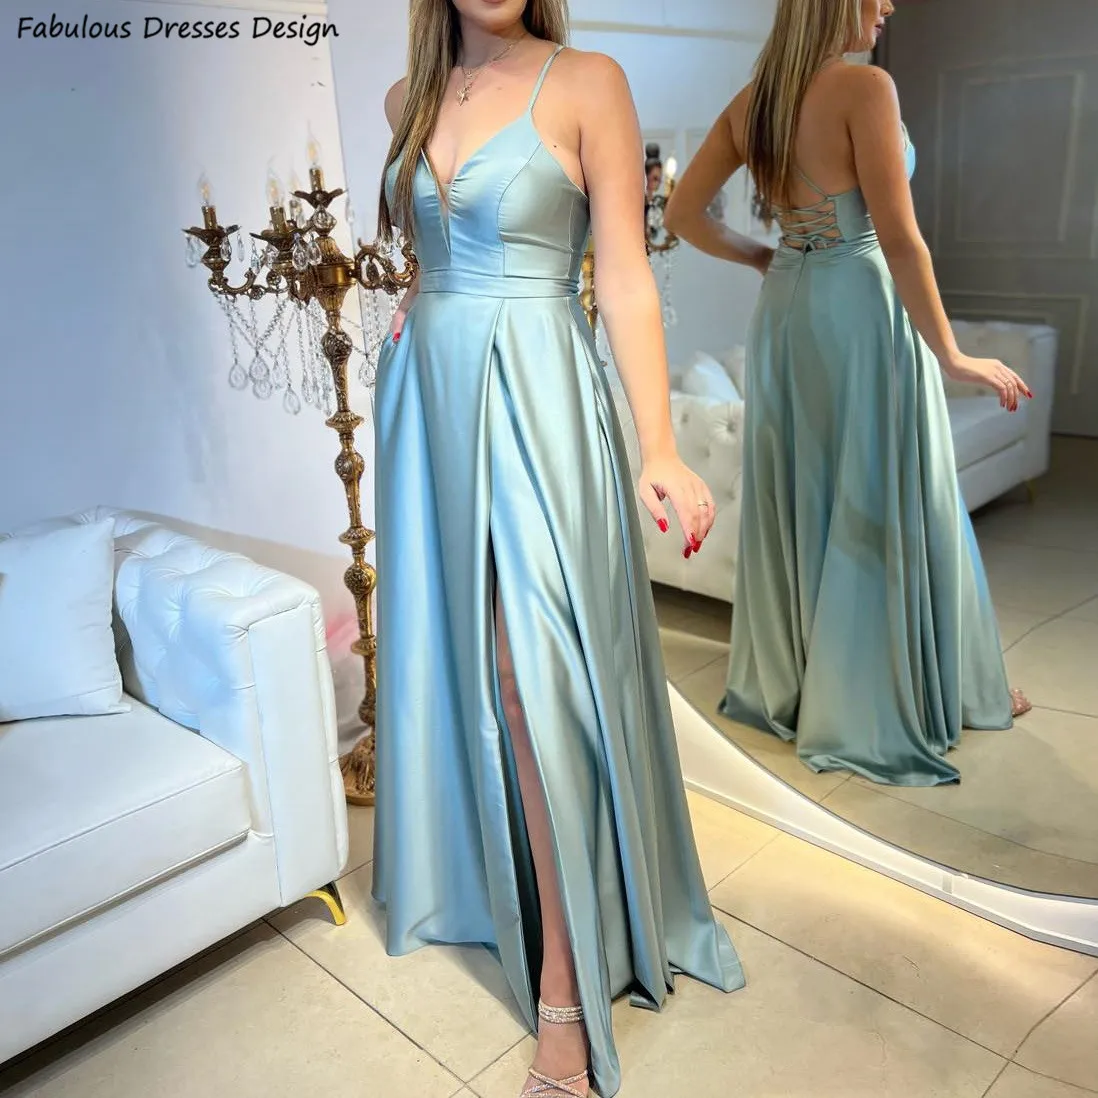 

Long A Line Pockets Bridesmaid Dresses Criss-cross Backless Sheer V-neck Slit Wedding Party Dress Spaghetti Straps Prom Gown